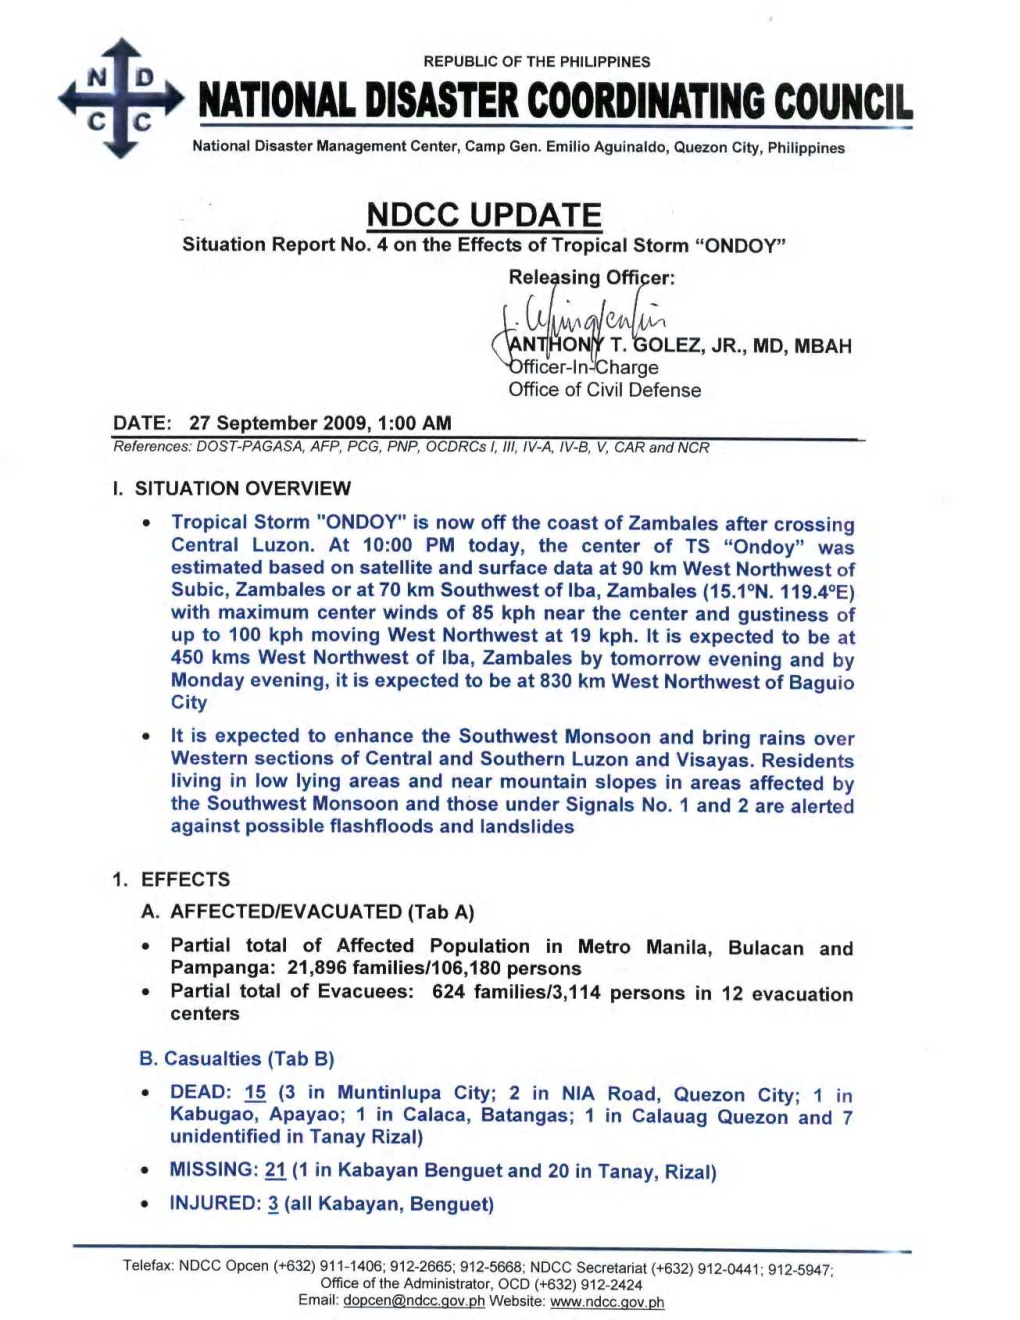 NDCC Sitrep No 4 on the Effects of TS Ondoy As of Sept. 27, 2009